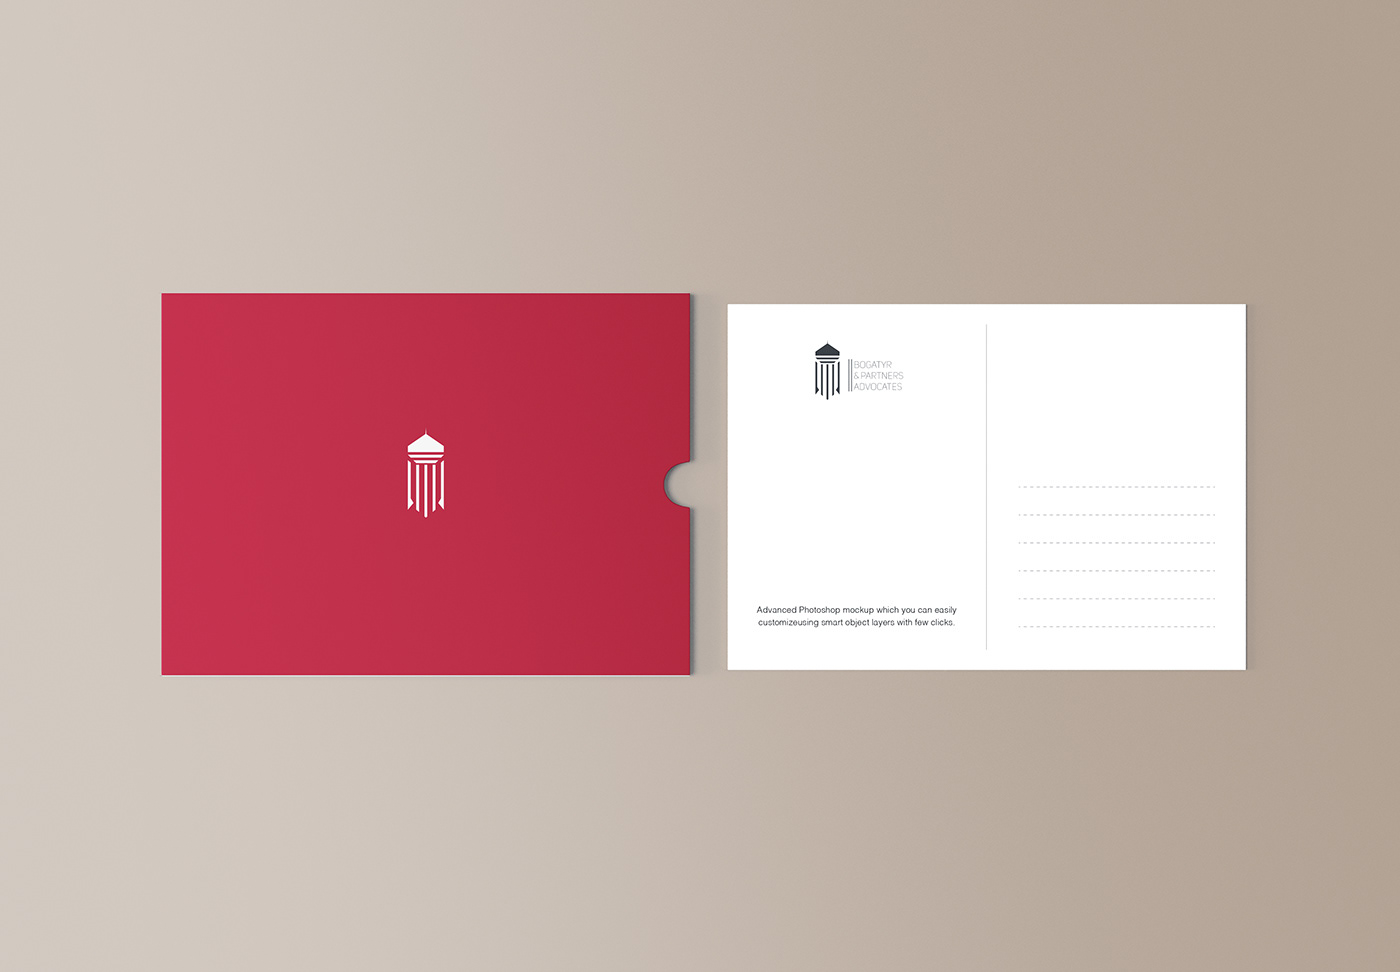 brand graphicdesign identity knight law lawlogo lawyer logo redcolor